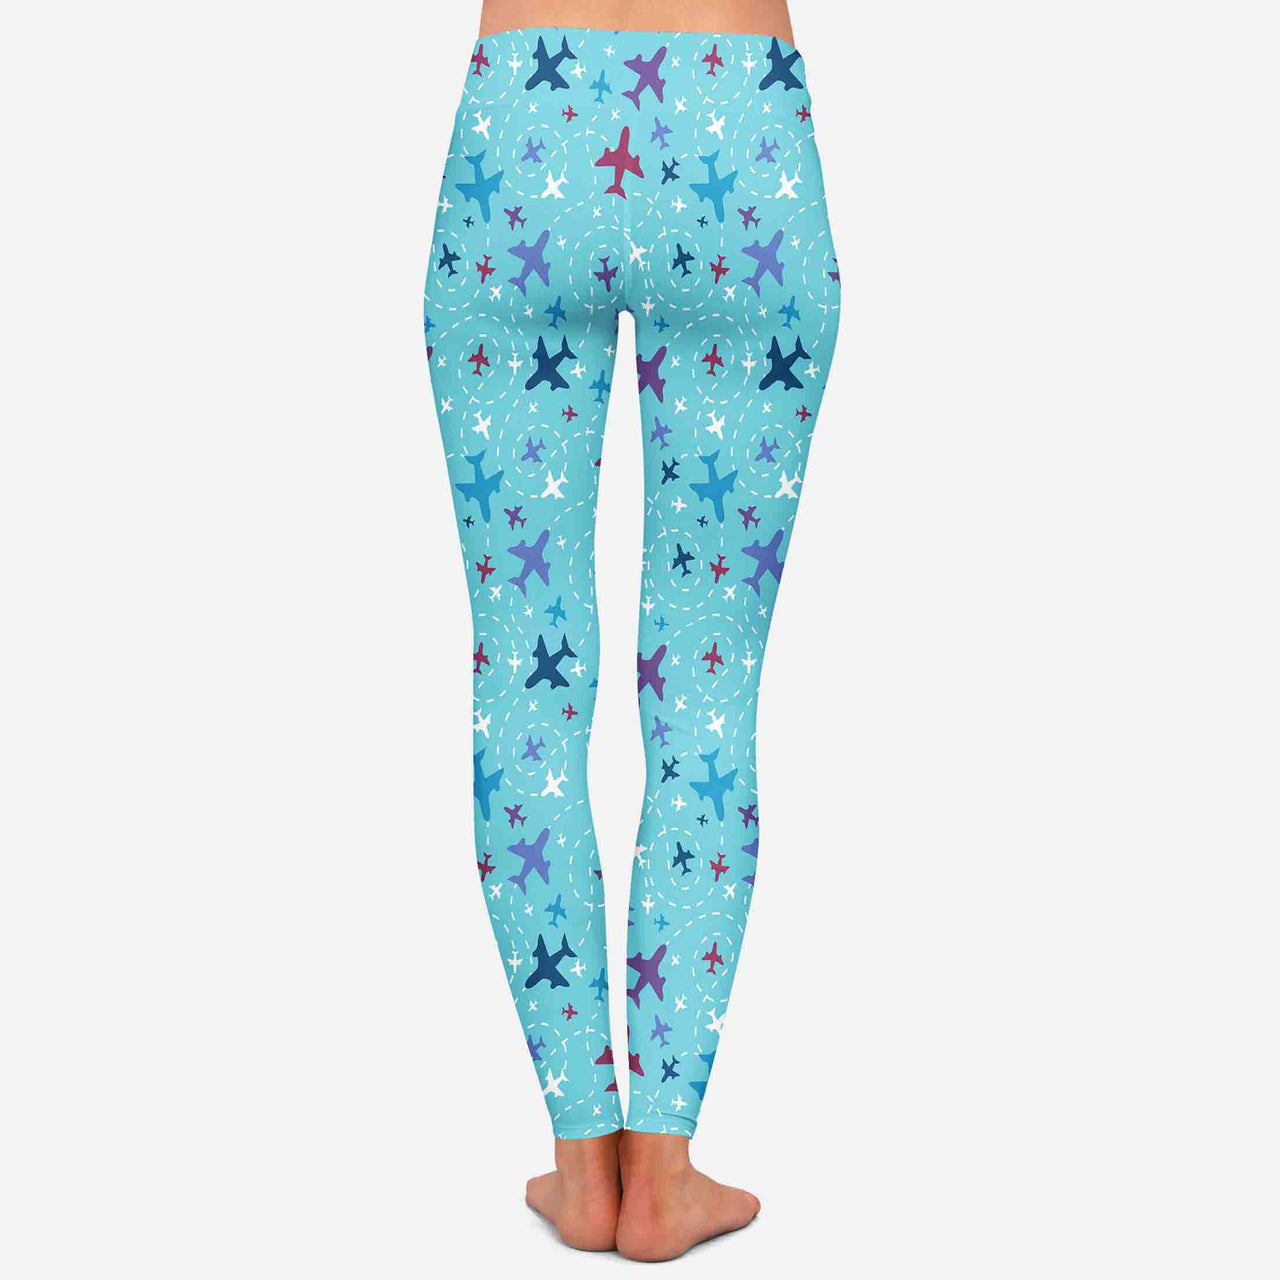 Love of Travel with Aircraft Designed Women Leggins